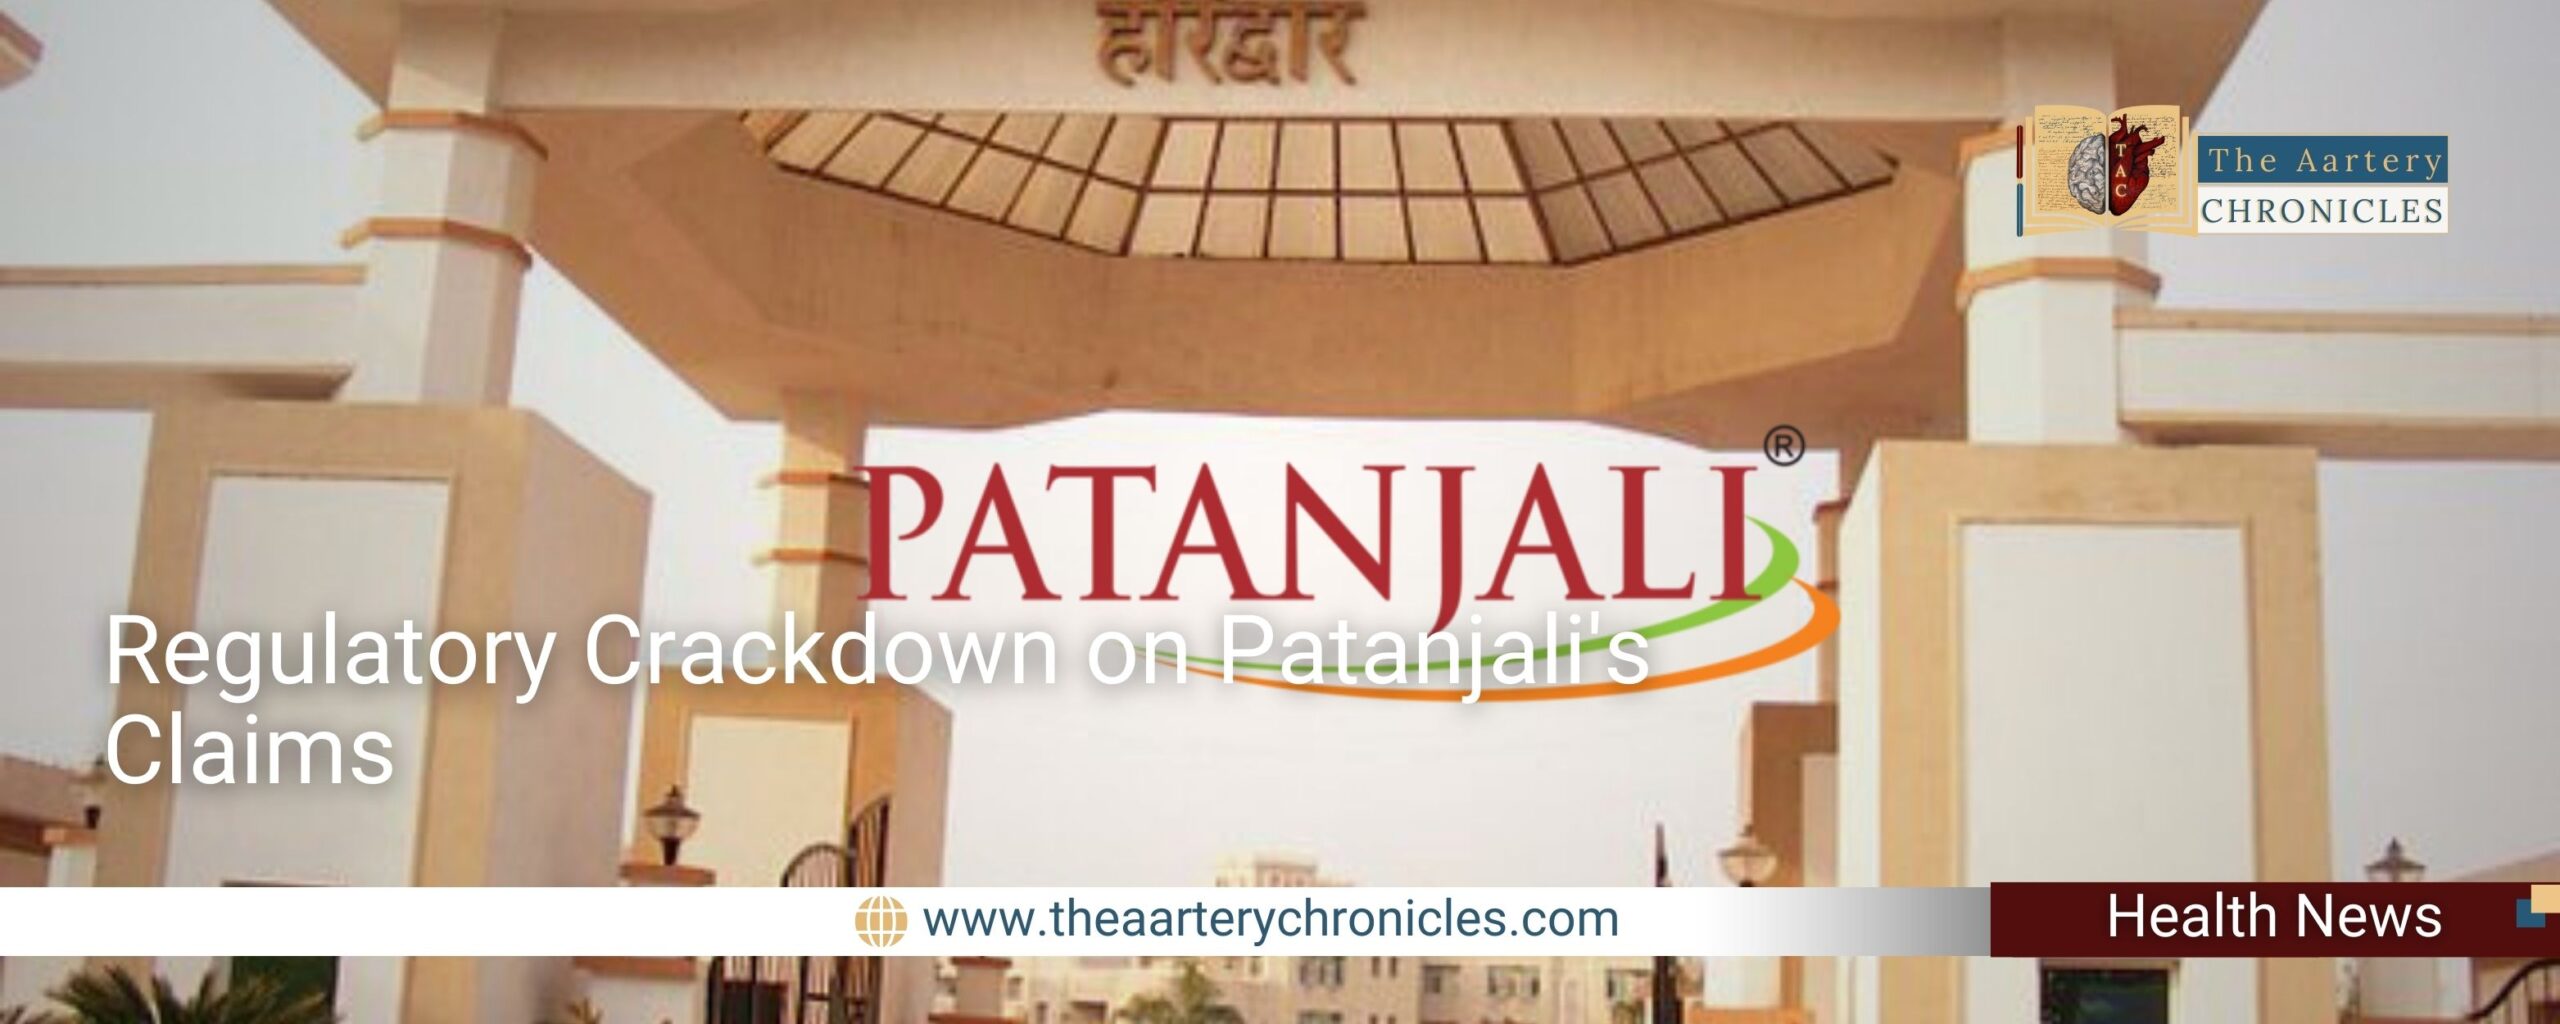 Patanjali's-Claims-the-aartery-chronicles-tac